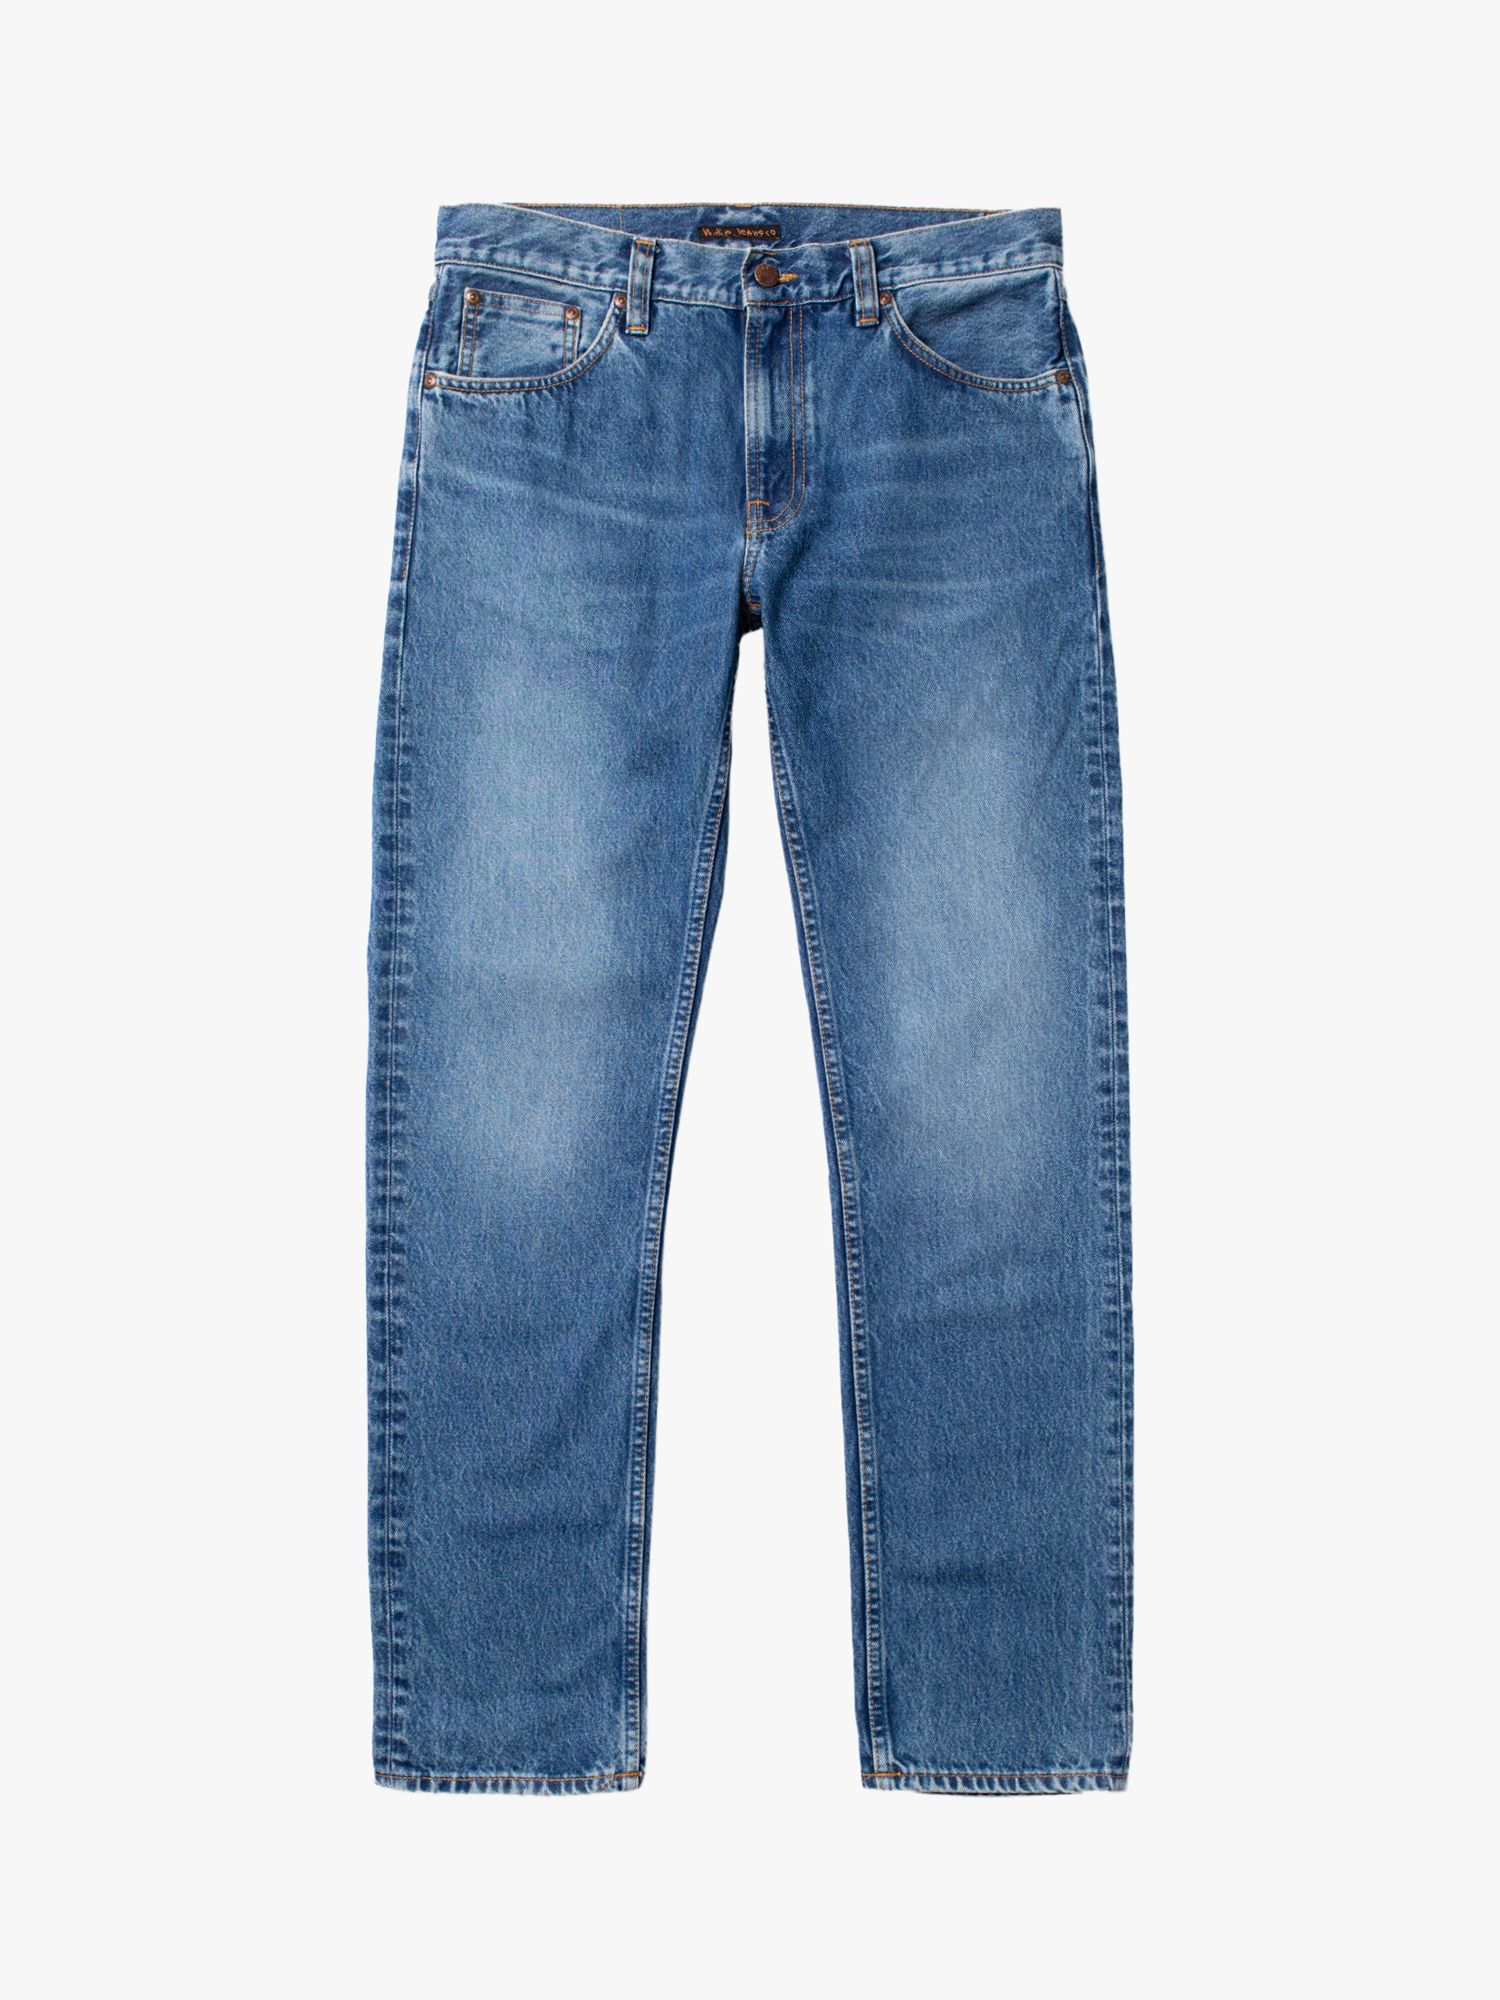 Nudie Jeans Gritty Jackson Regular Fit Jeans, Blue at John Lewis & Partners